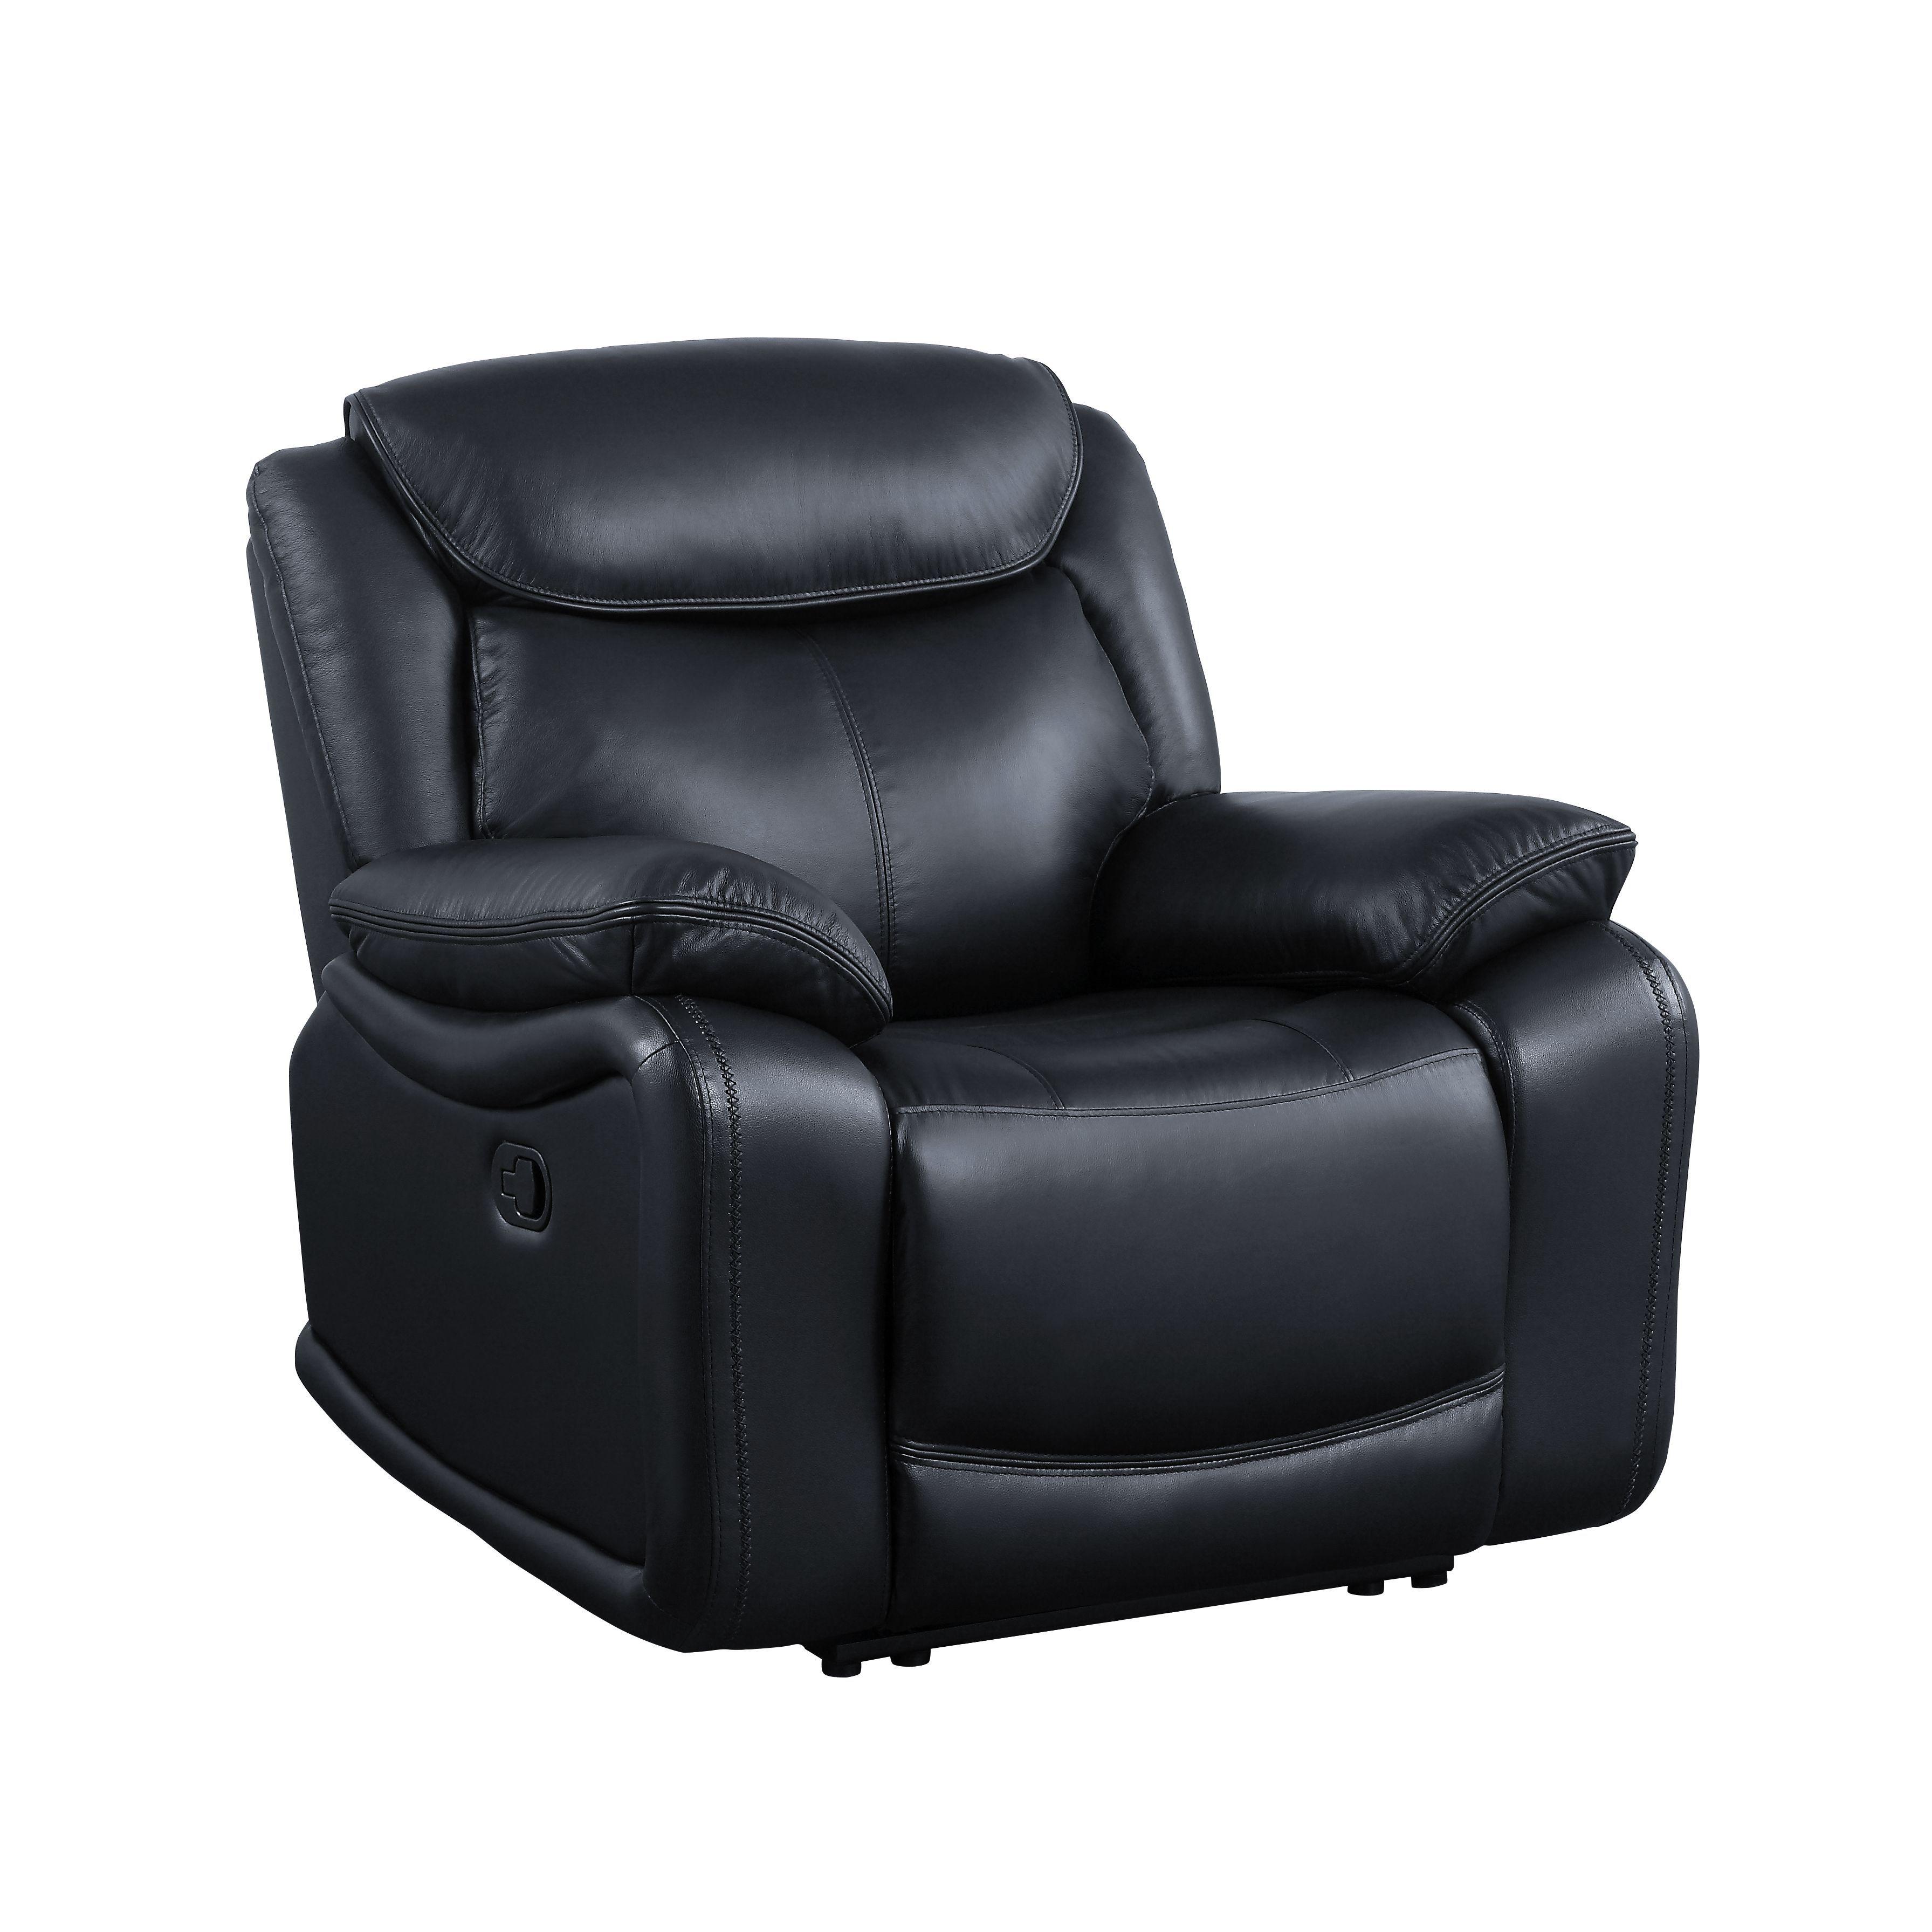 

    
Contemporary Black Leather Chair by Acme Ralorel LV00062
